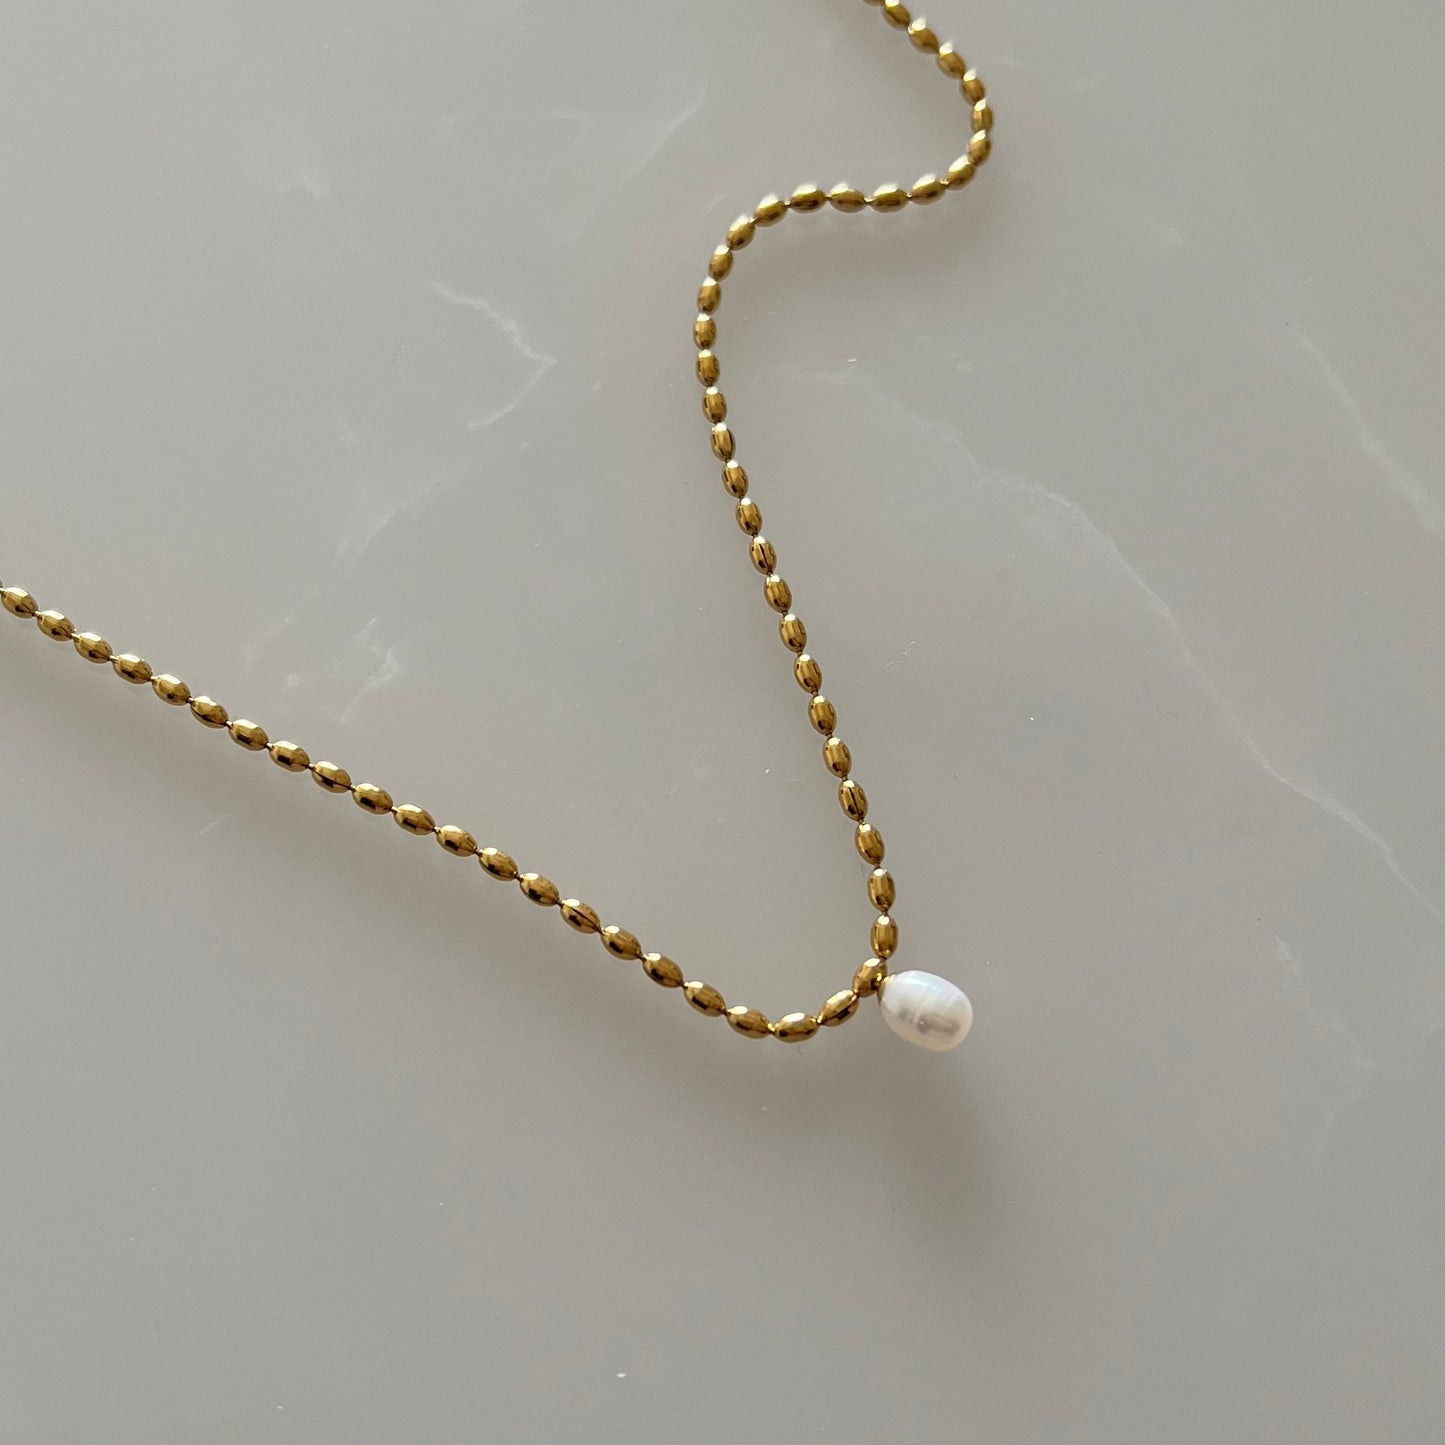 18KT Gold Plated Beaded Necklace with Pearl Charm